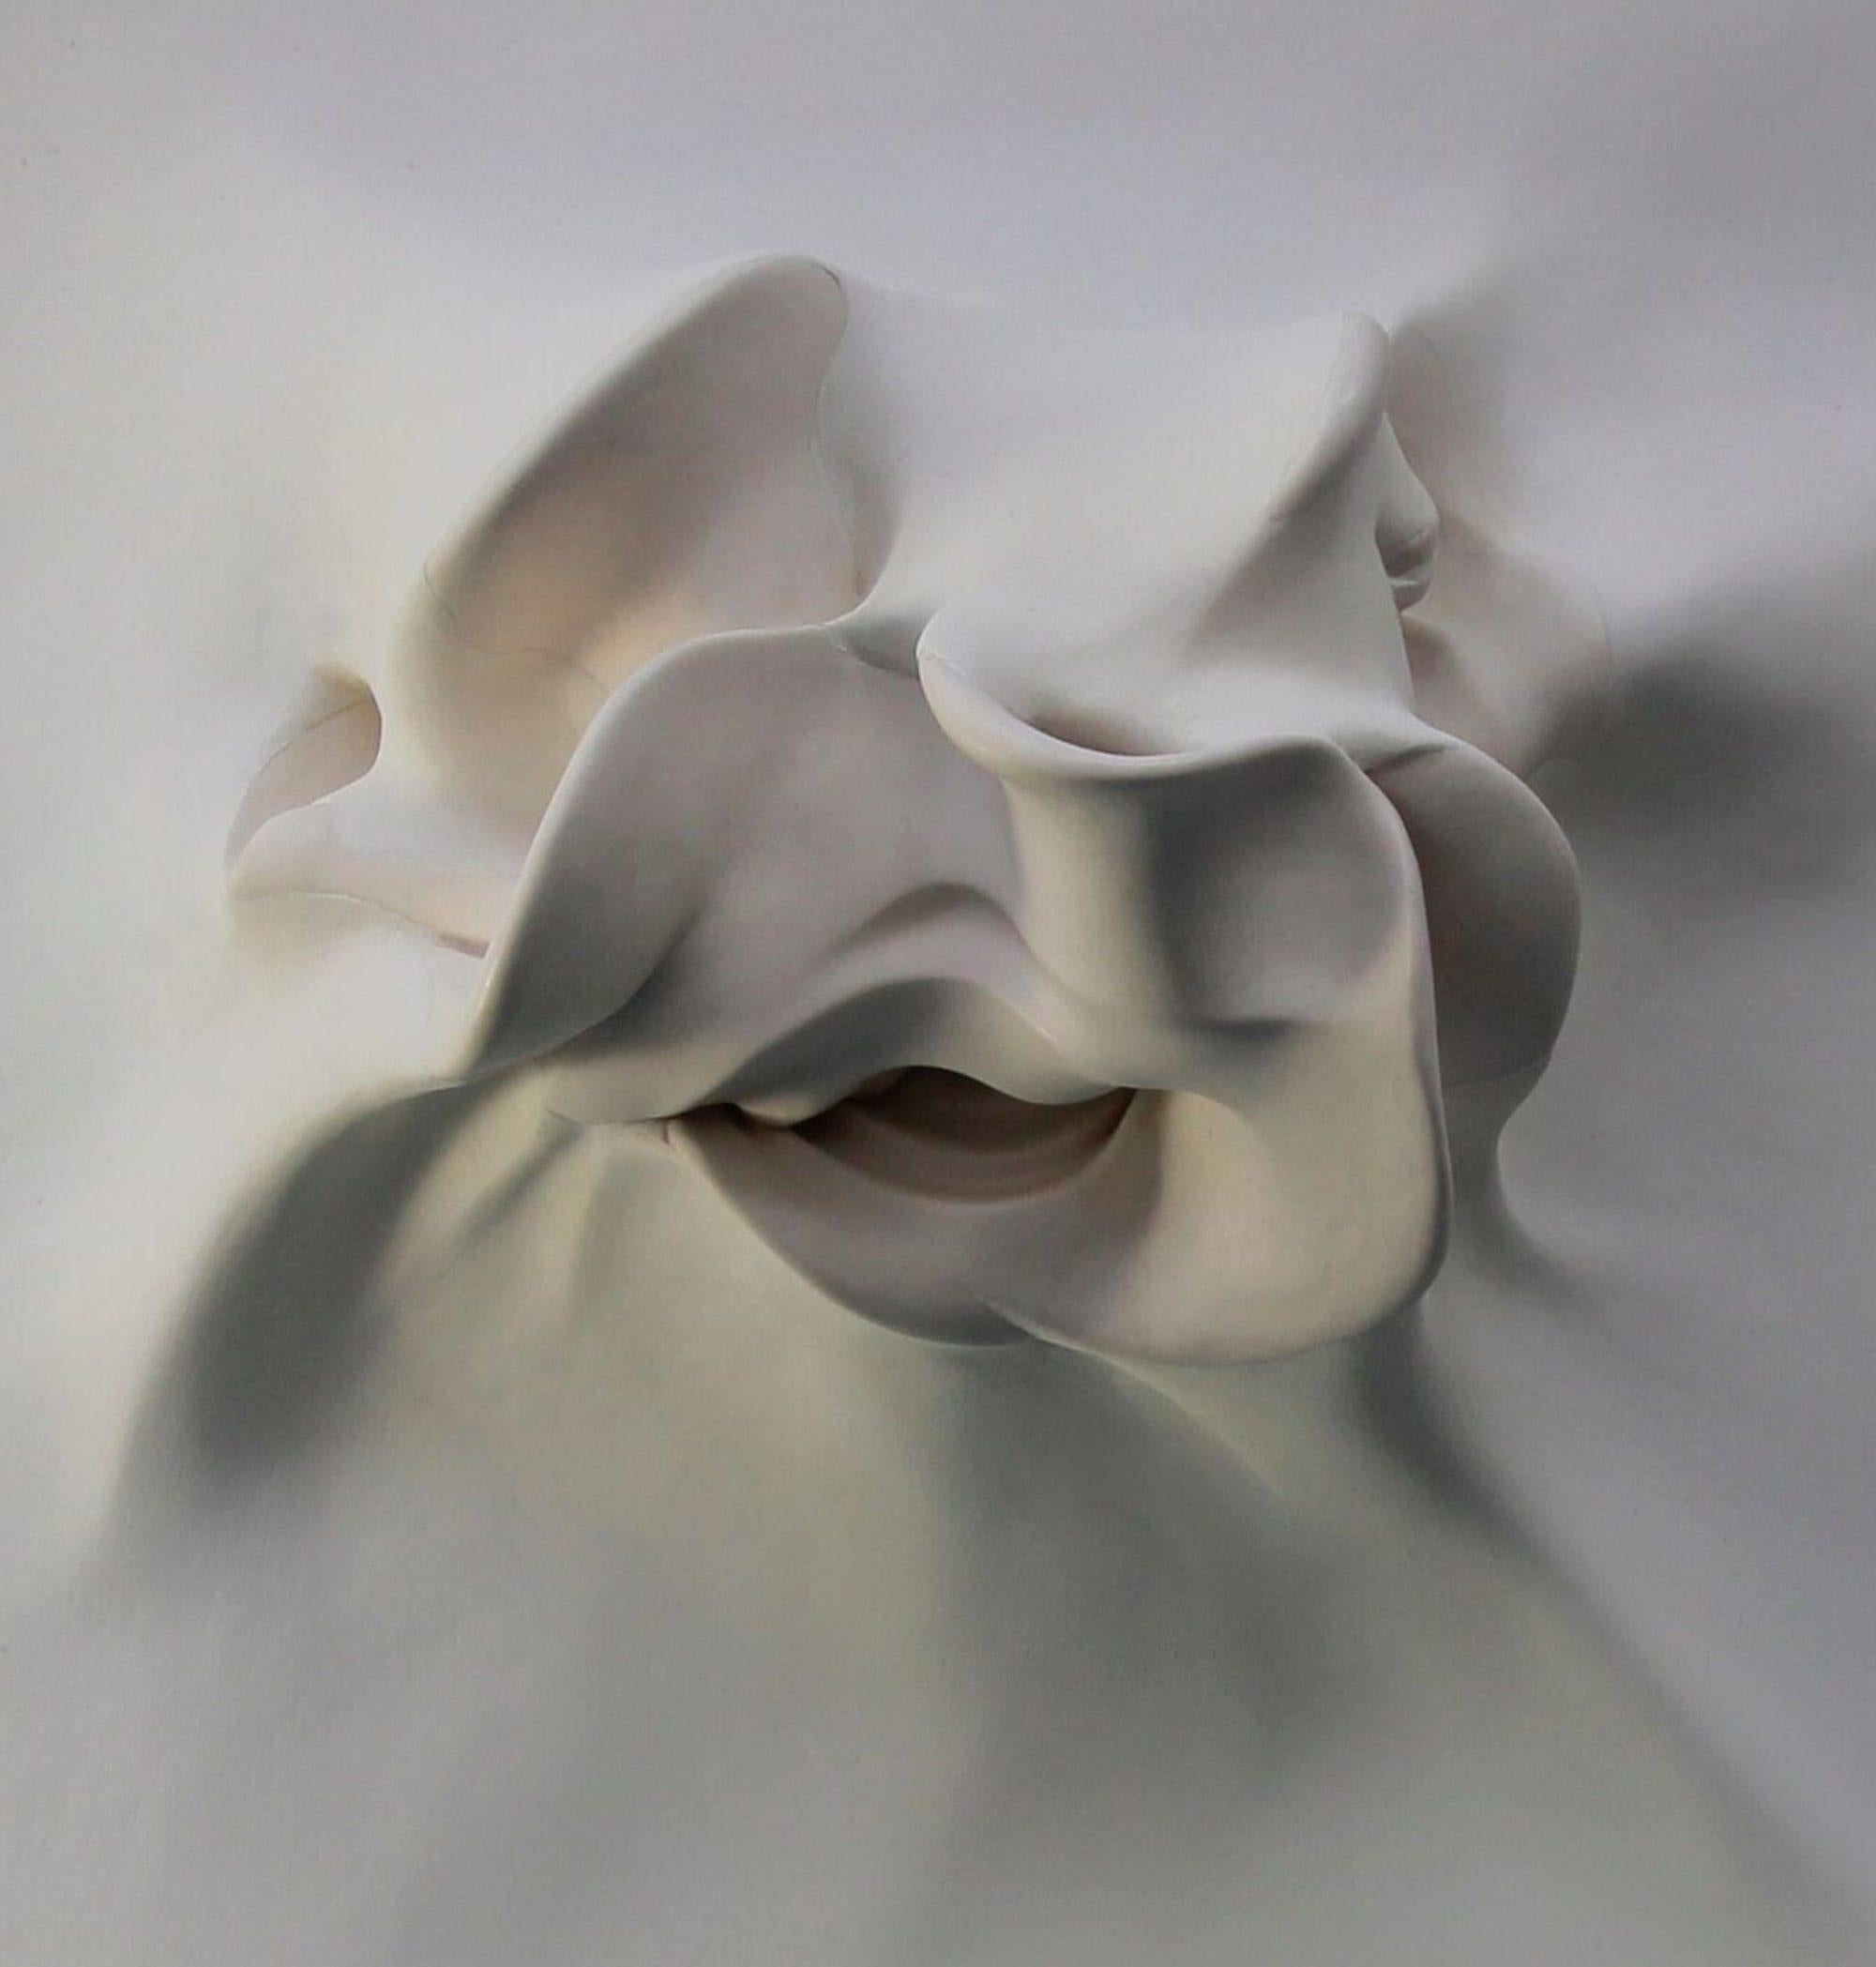 Emergence 2 by Sharon Brill - Wall sculpture, mixed media, white ceramic, square For Sale 3